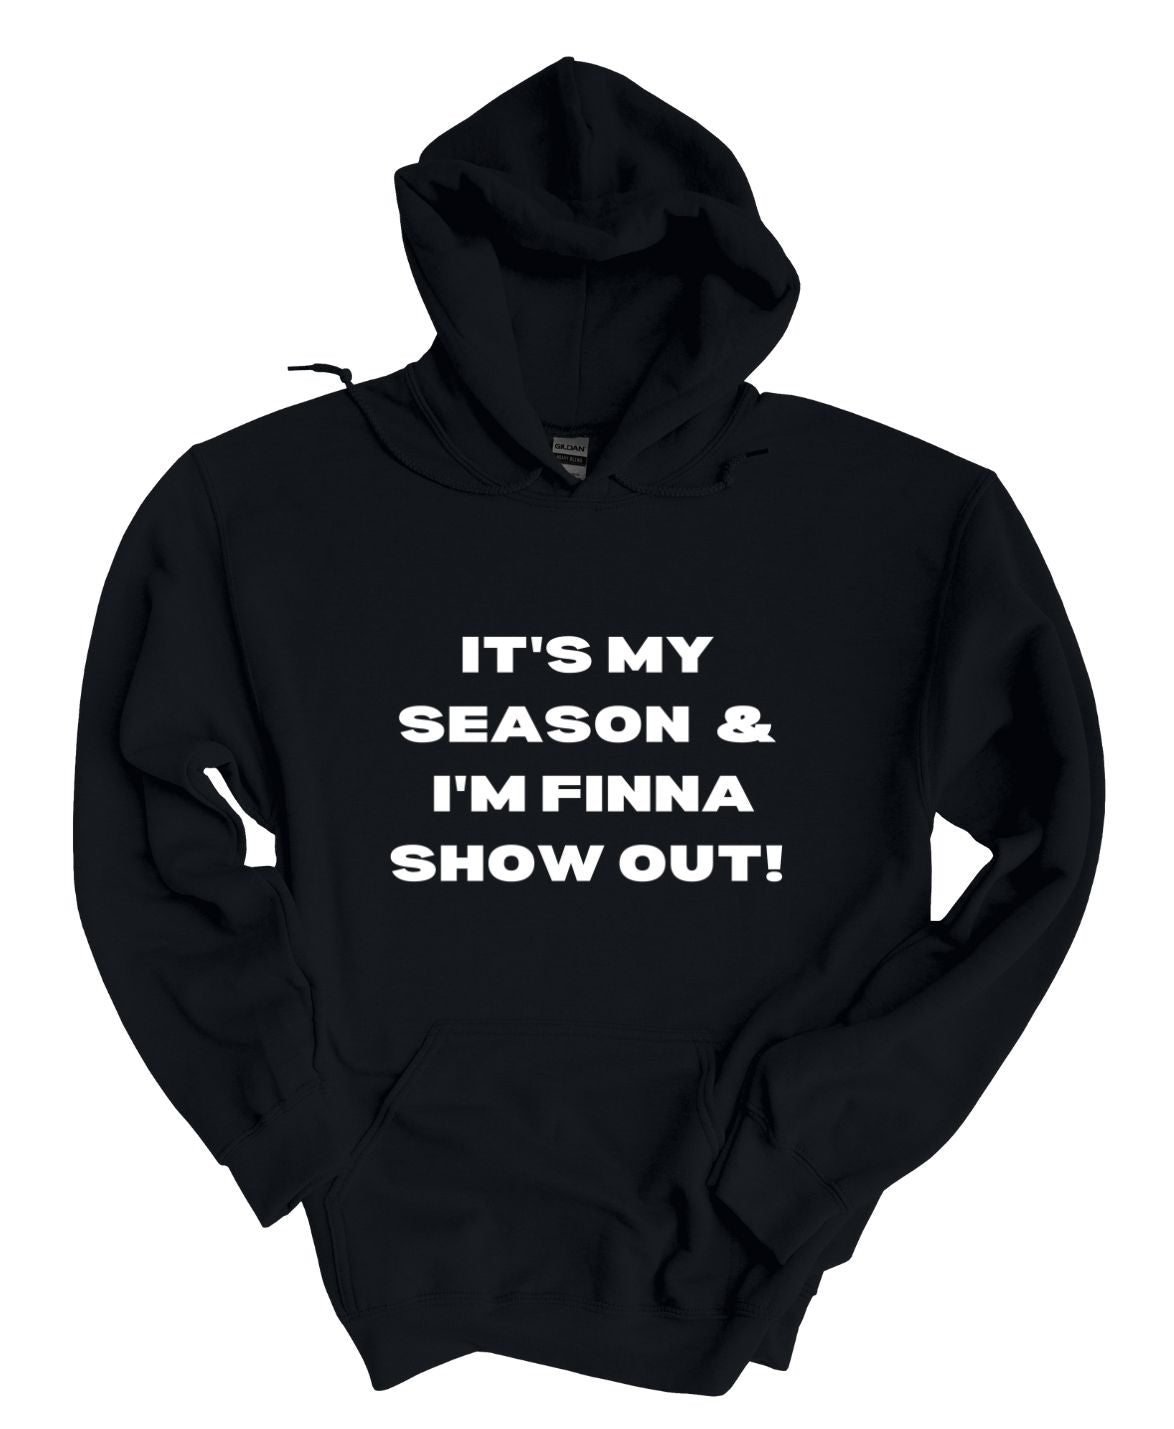 It's My Season and I'm Finna Show Out  Hoodies